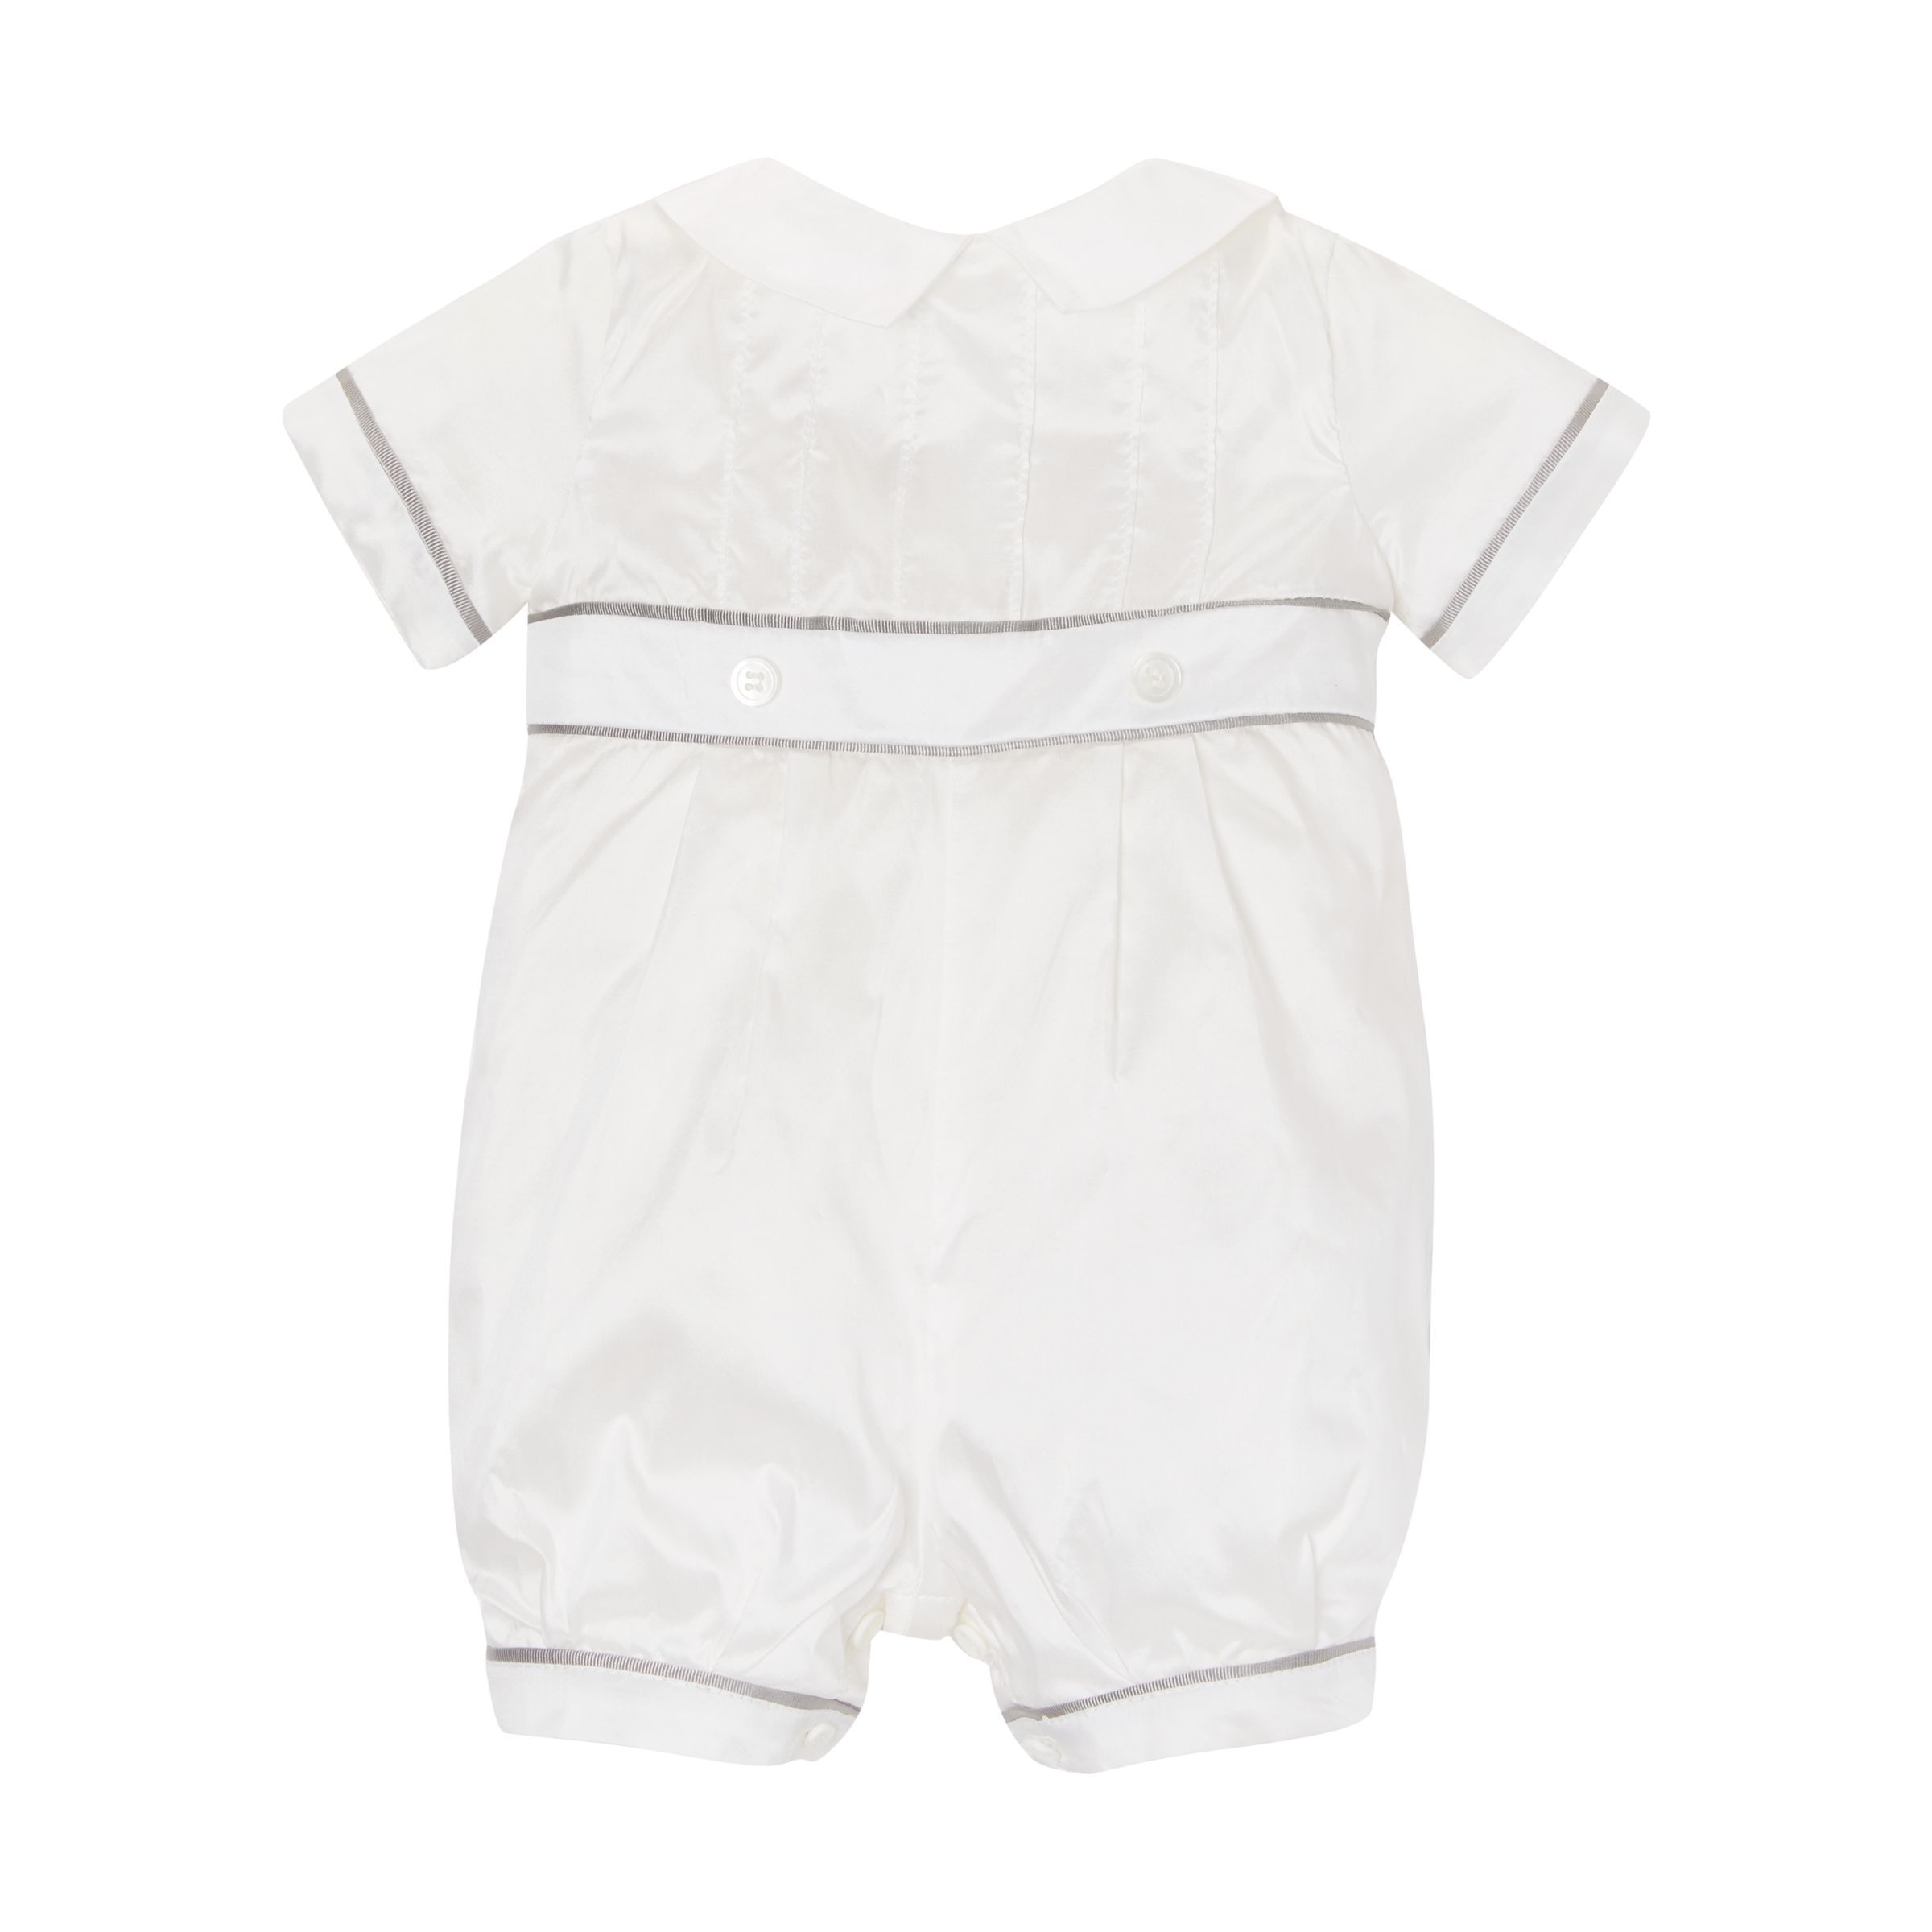 christening outfit for 1 year old boy